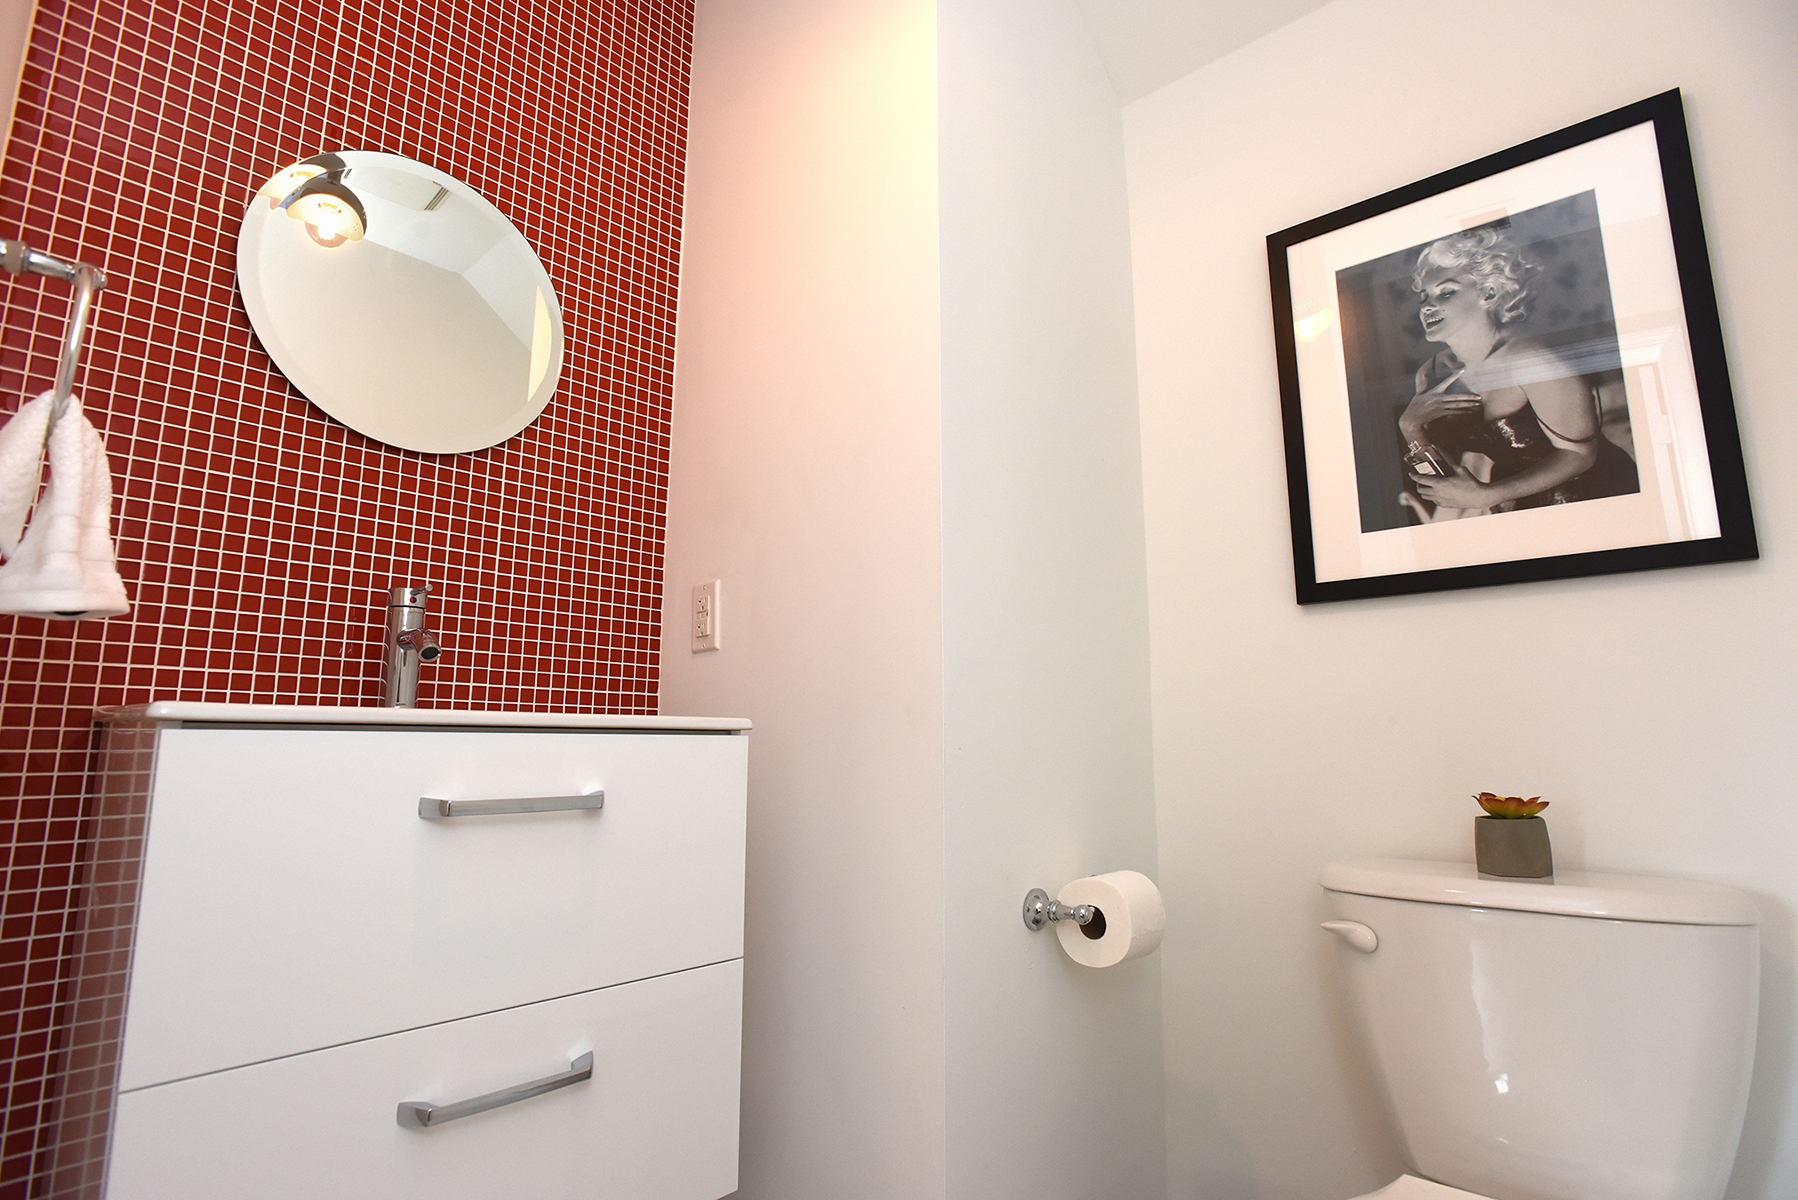 6 quick tips for styling your powder room like a pro